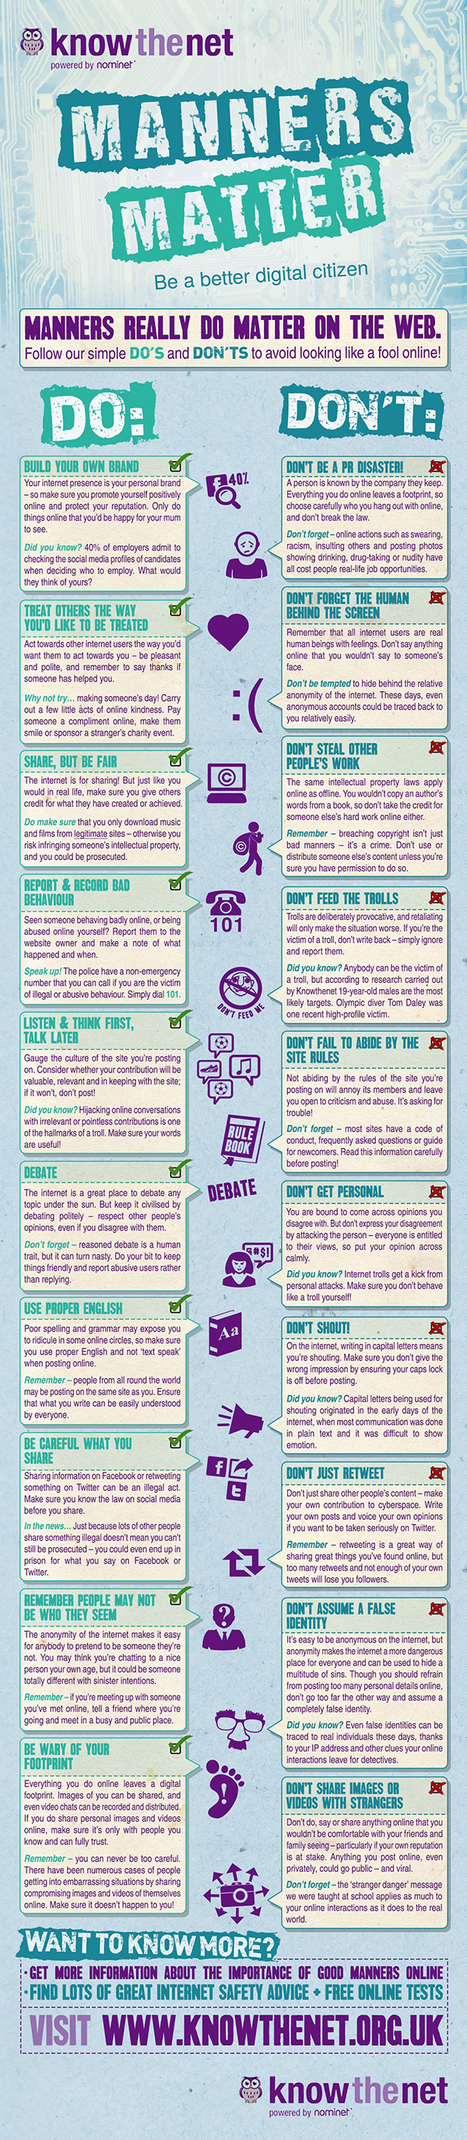 10 Important Things for Students to Be Good Digital Citizens [infographic] | The Creative Commons | Scoop.it